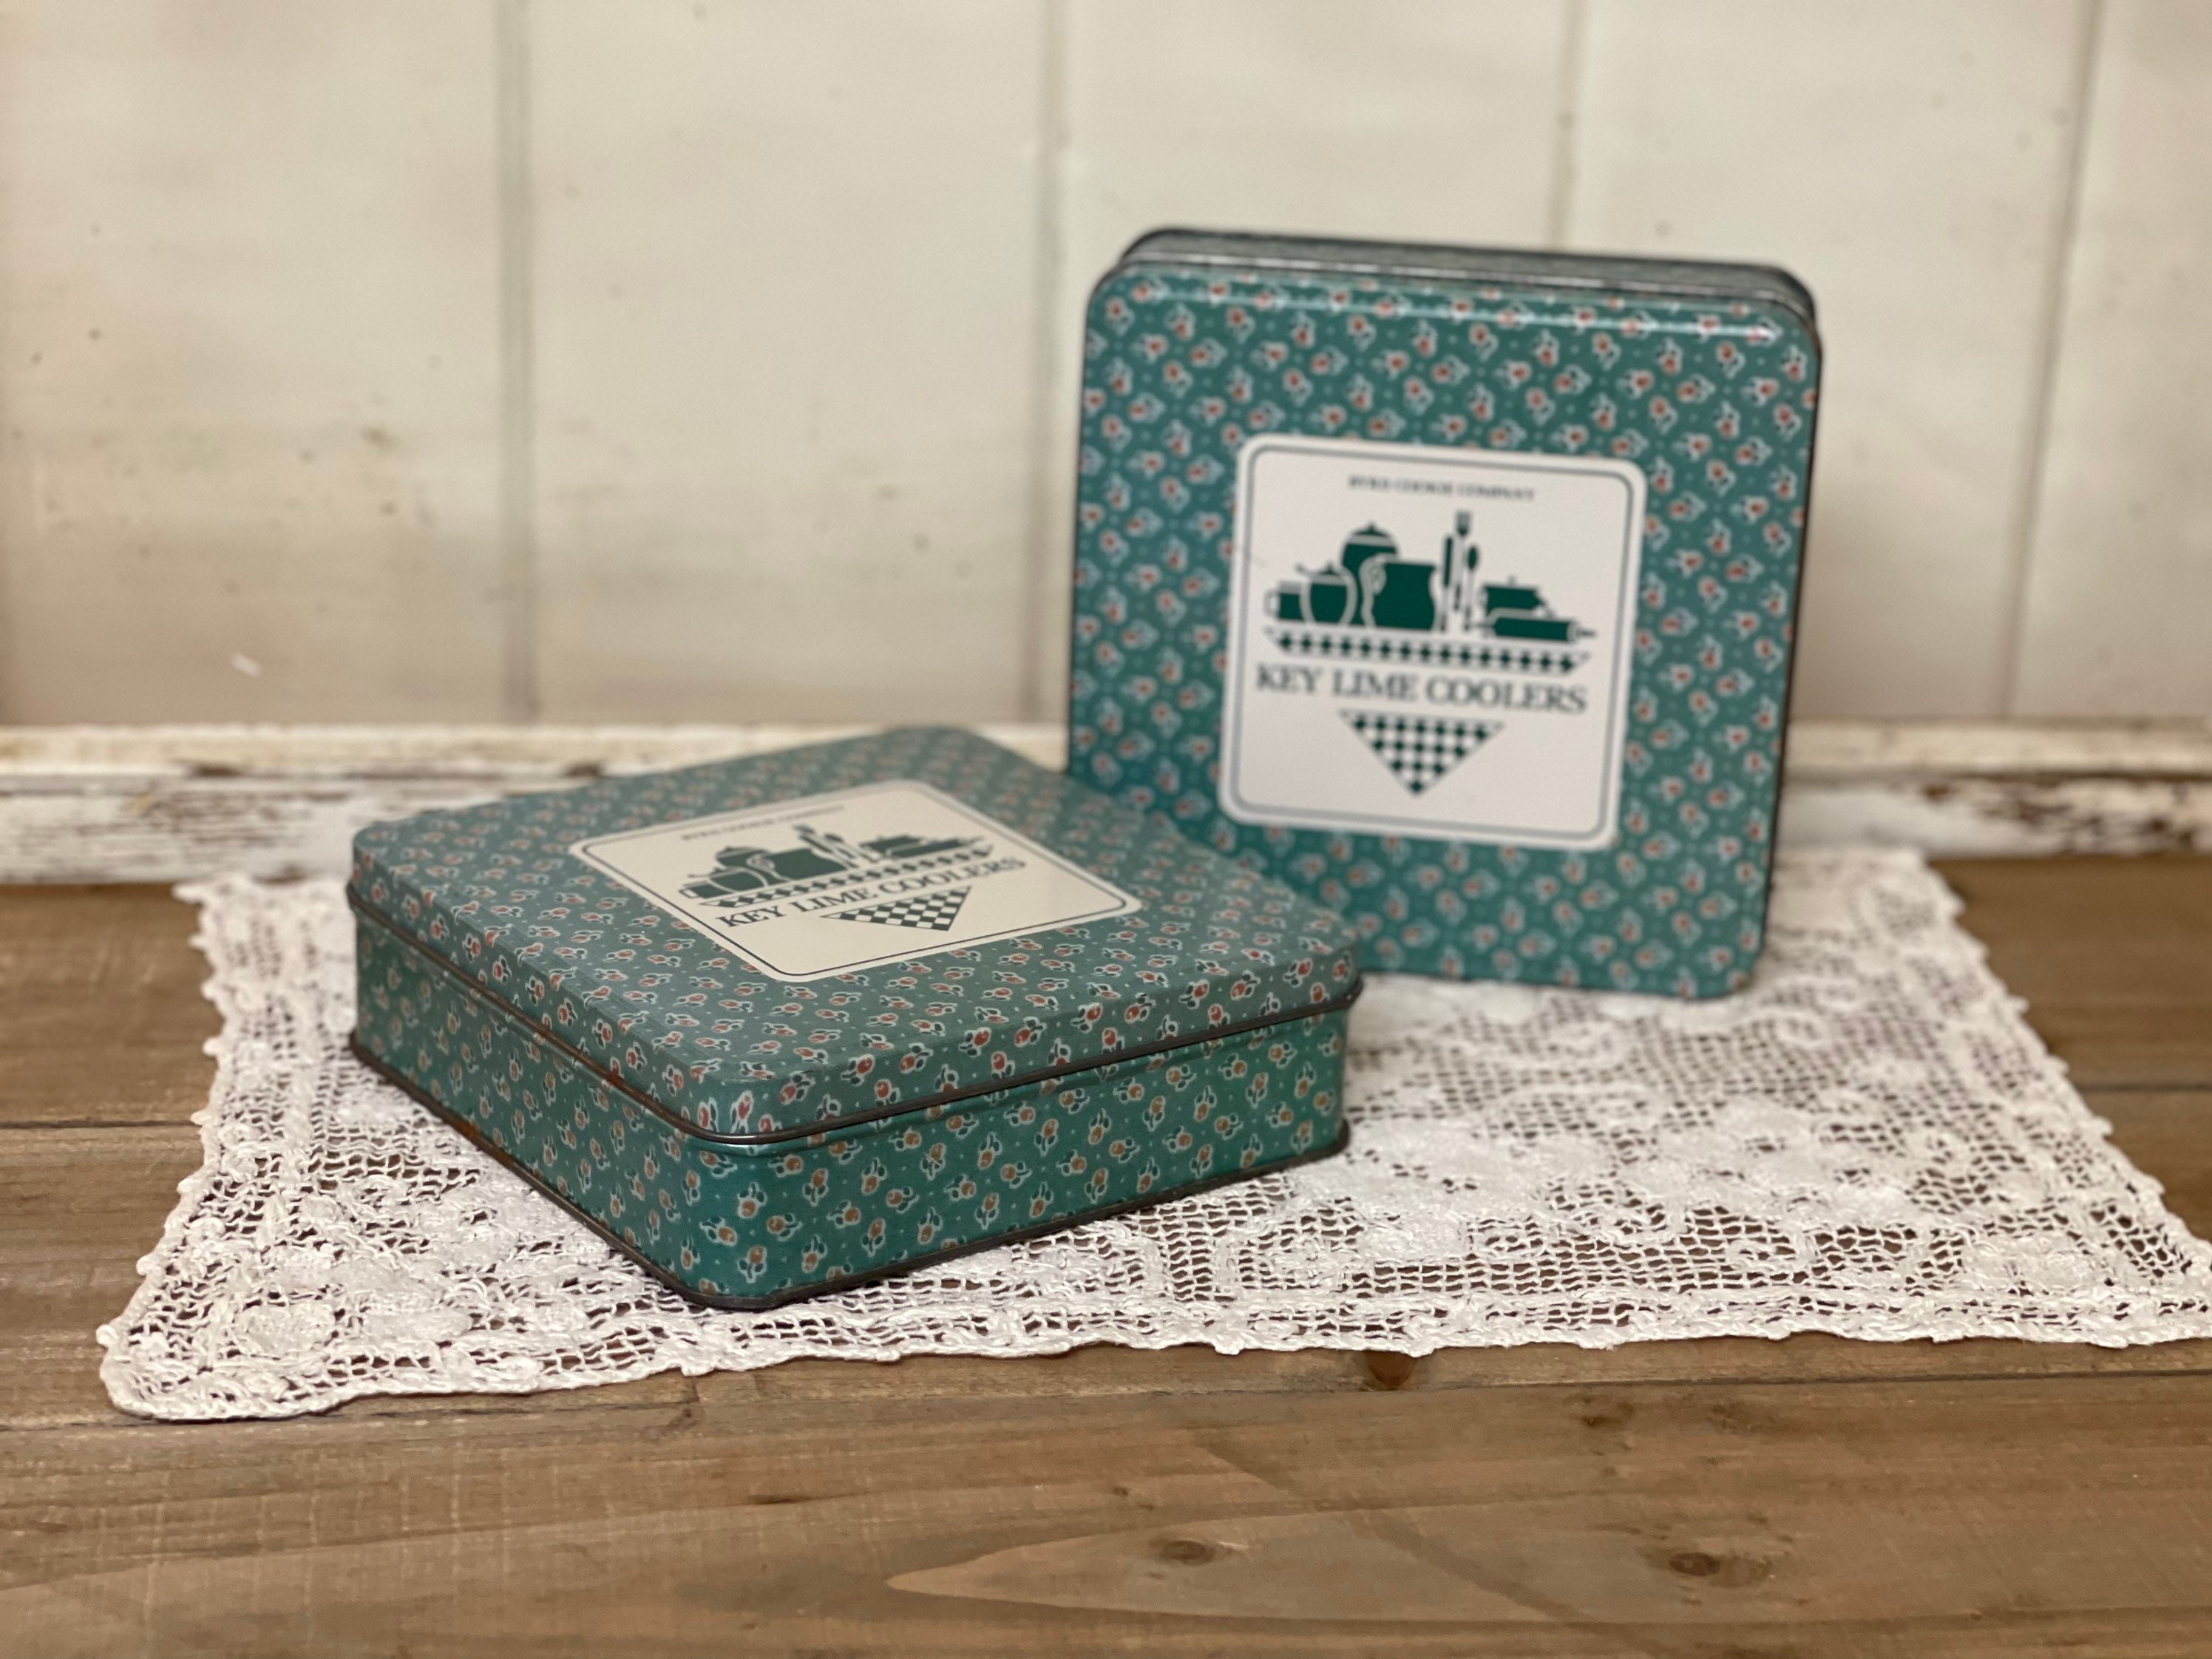 Custom Square cookies tin box biscuit tin can_Candy cookies tins_天鑫包装